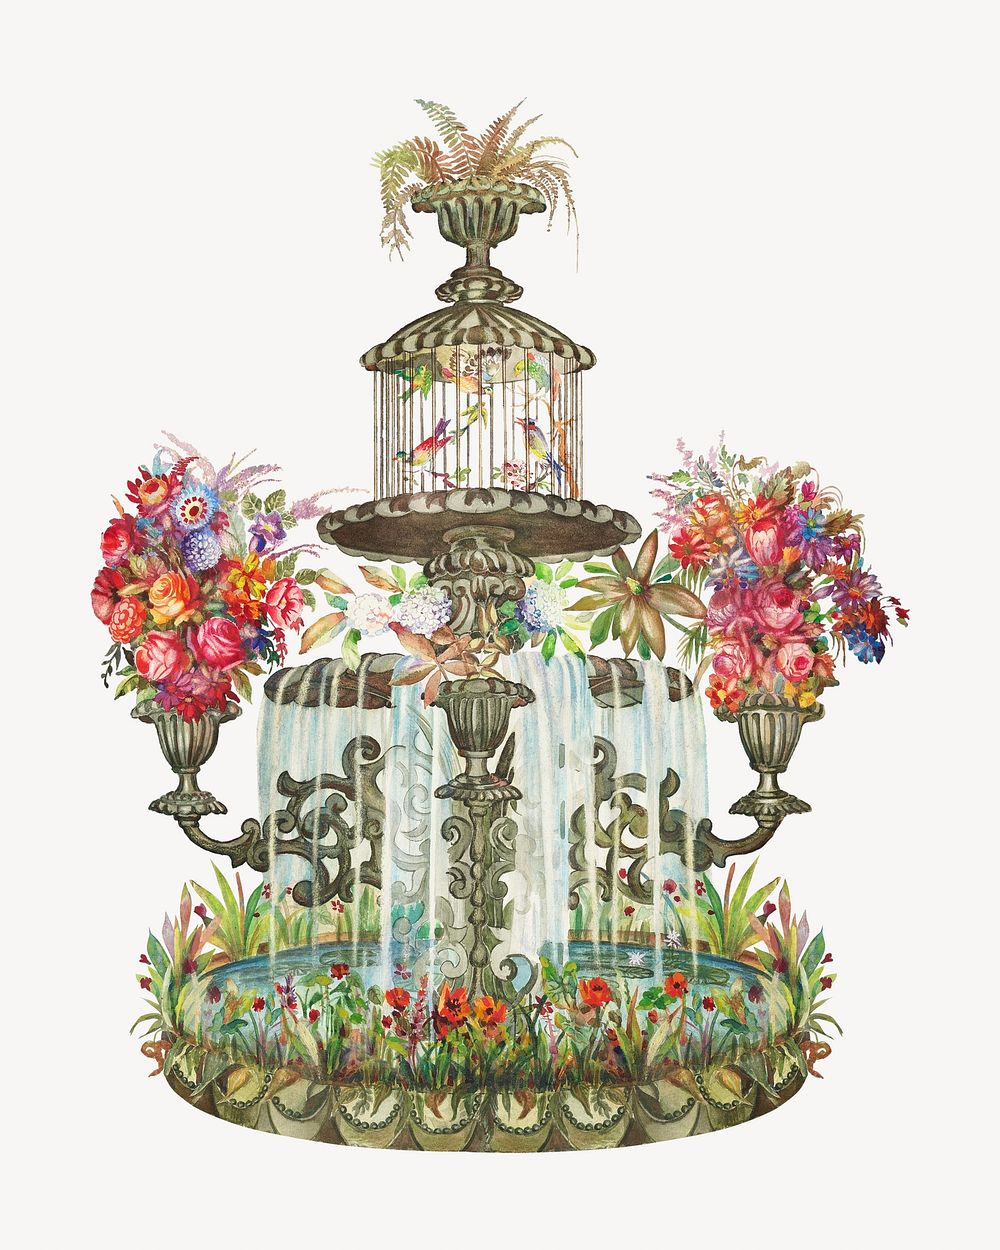 Conservatory Fountain, vintage garden illustration by Perkins Harnly and Nicholas Zupa. Remixed by rawpixel.